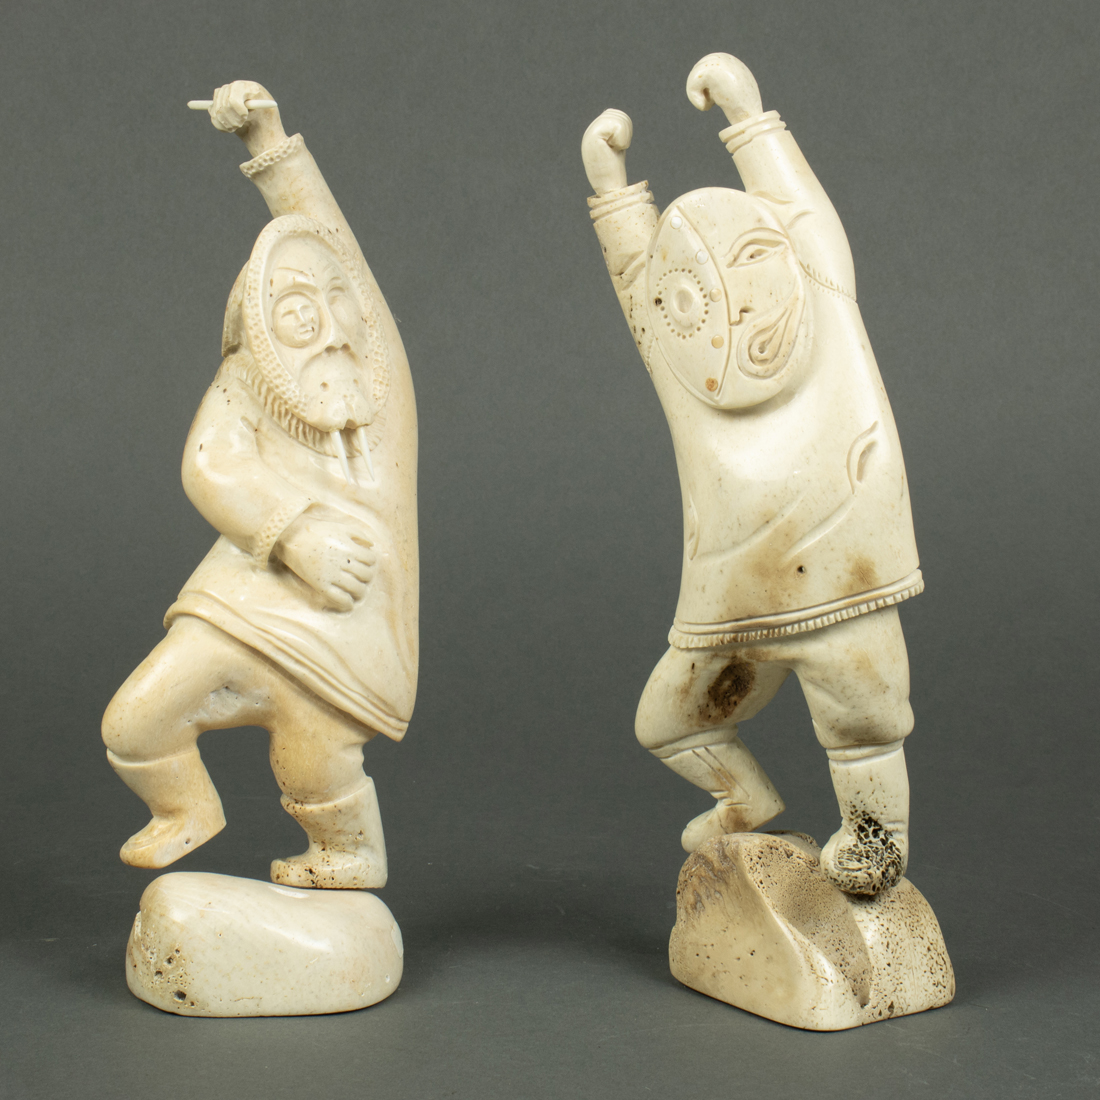 TWO INUIT CARVED BONE FIGURAL FIGURES,